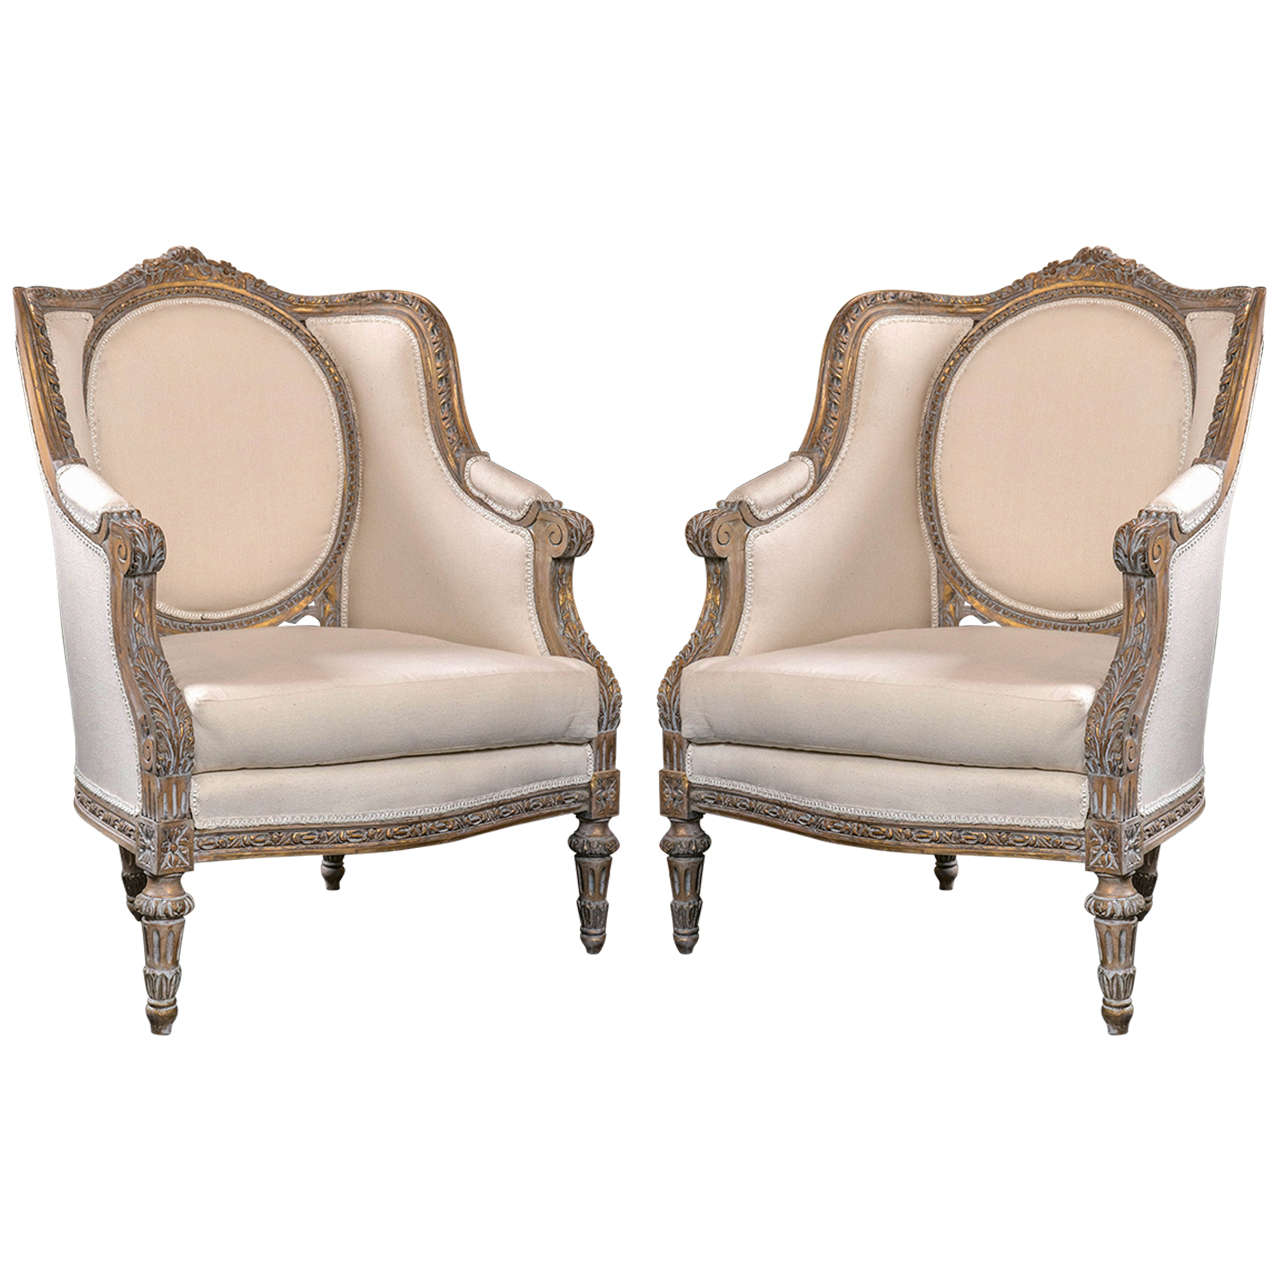 Pair of Vintage French Louis XVI Style Bergere Chairs